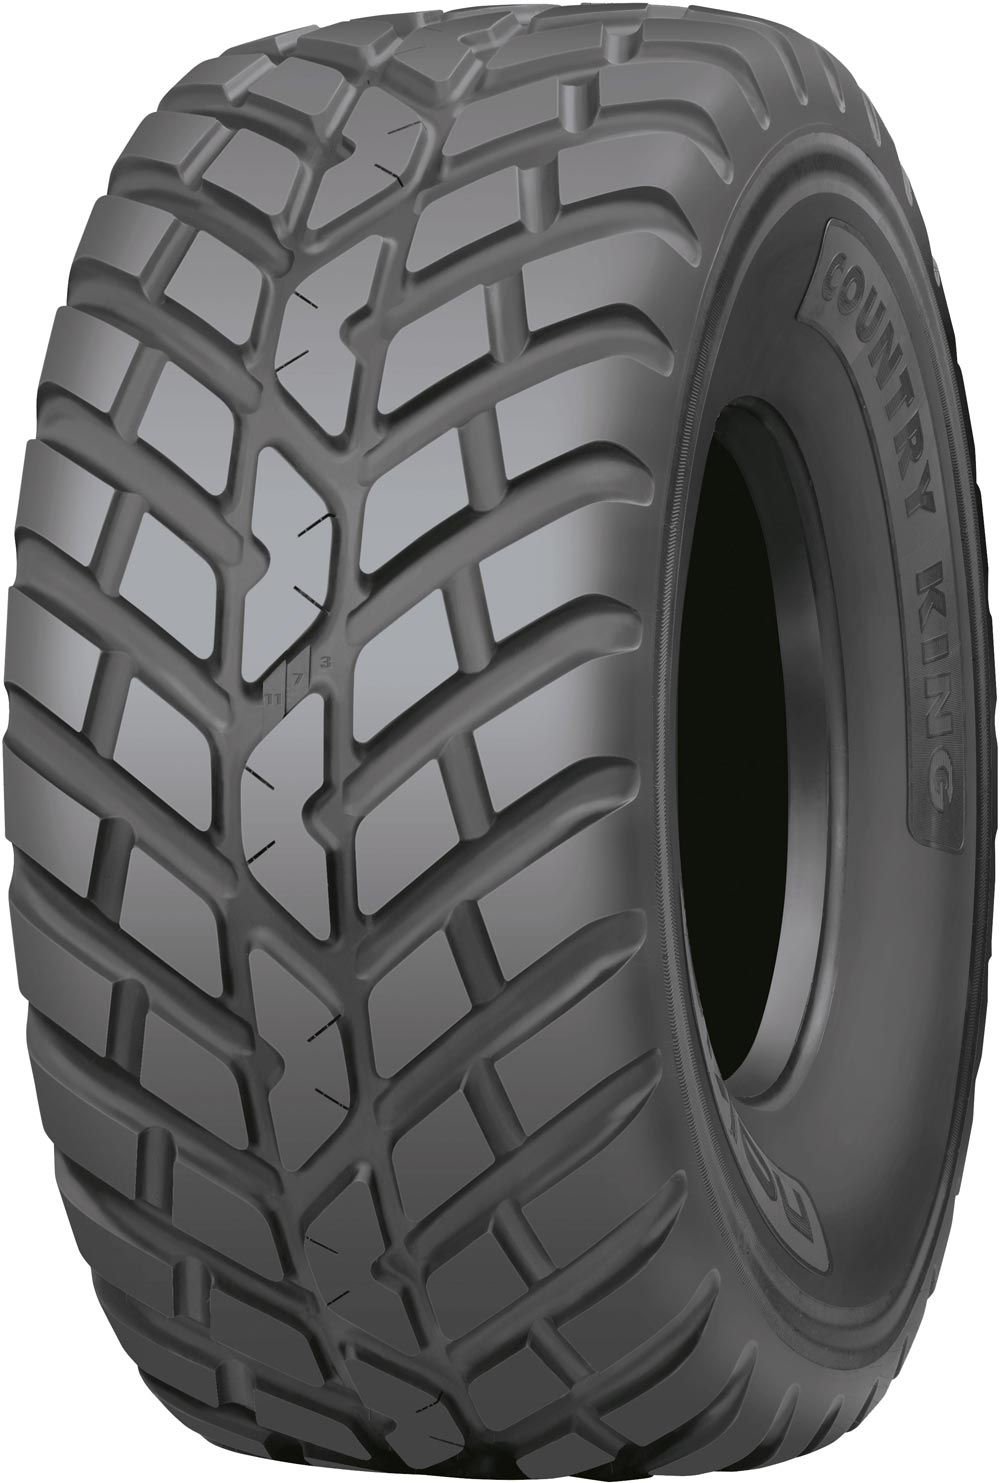 product_type-industrial_tires NOKIAN COUNTRY KING TL 560/45 R22.5 152D